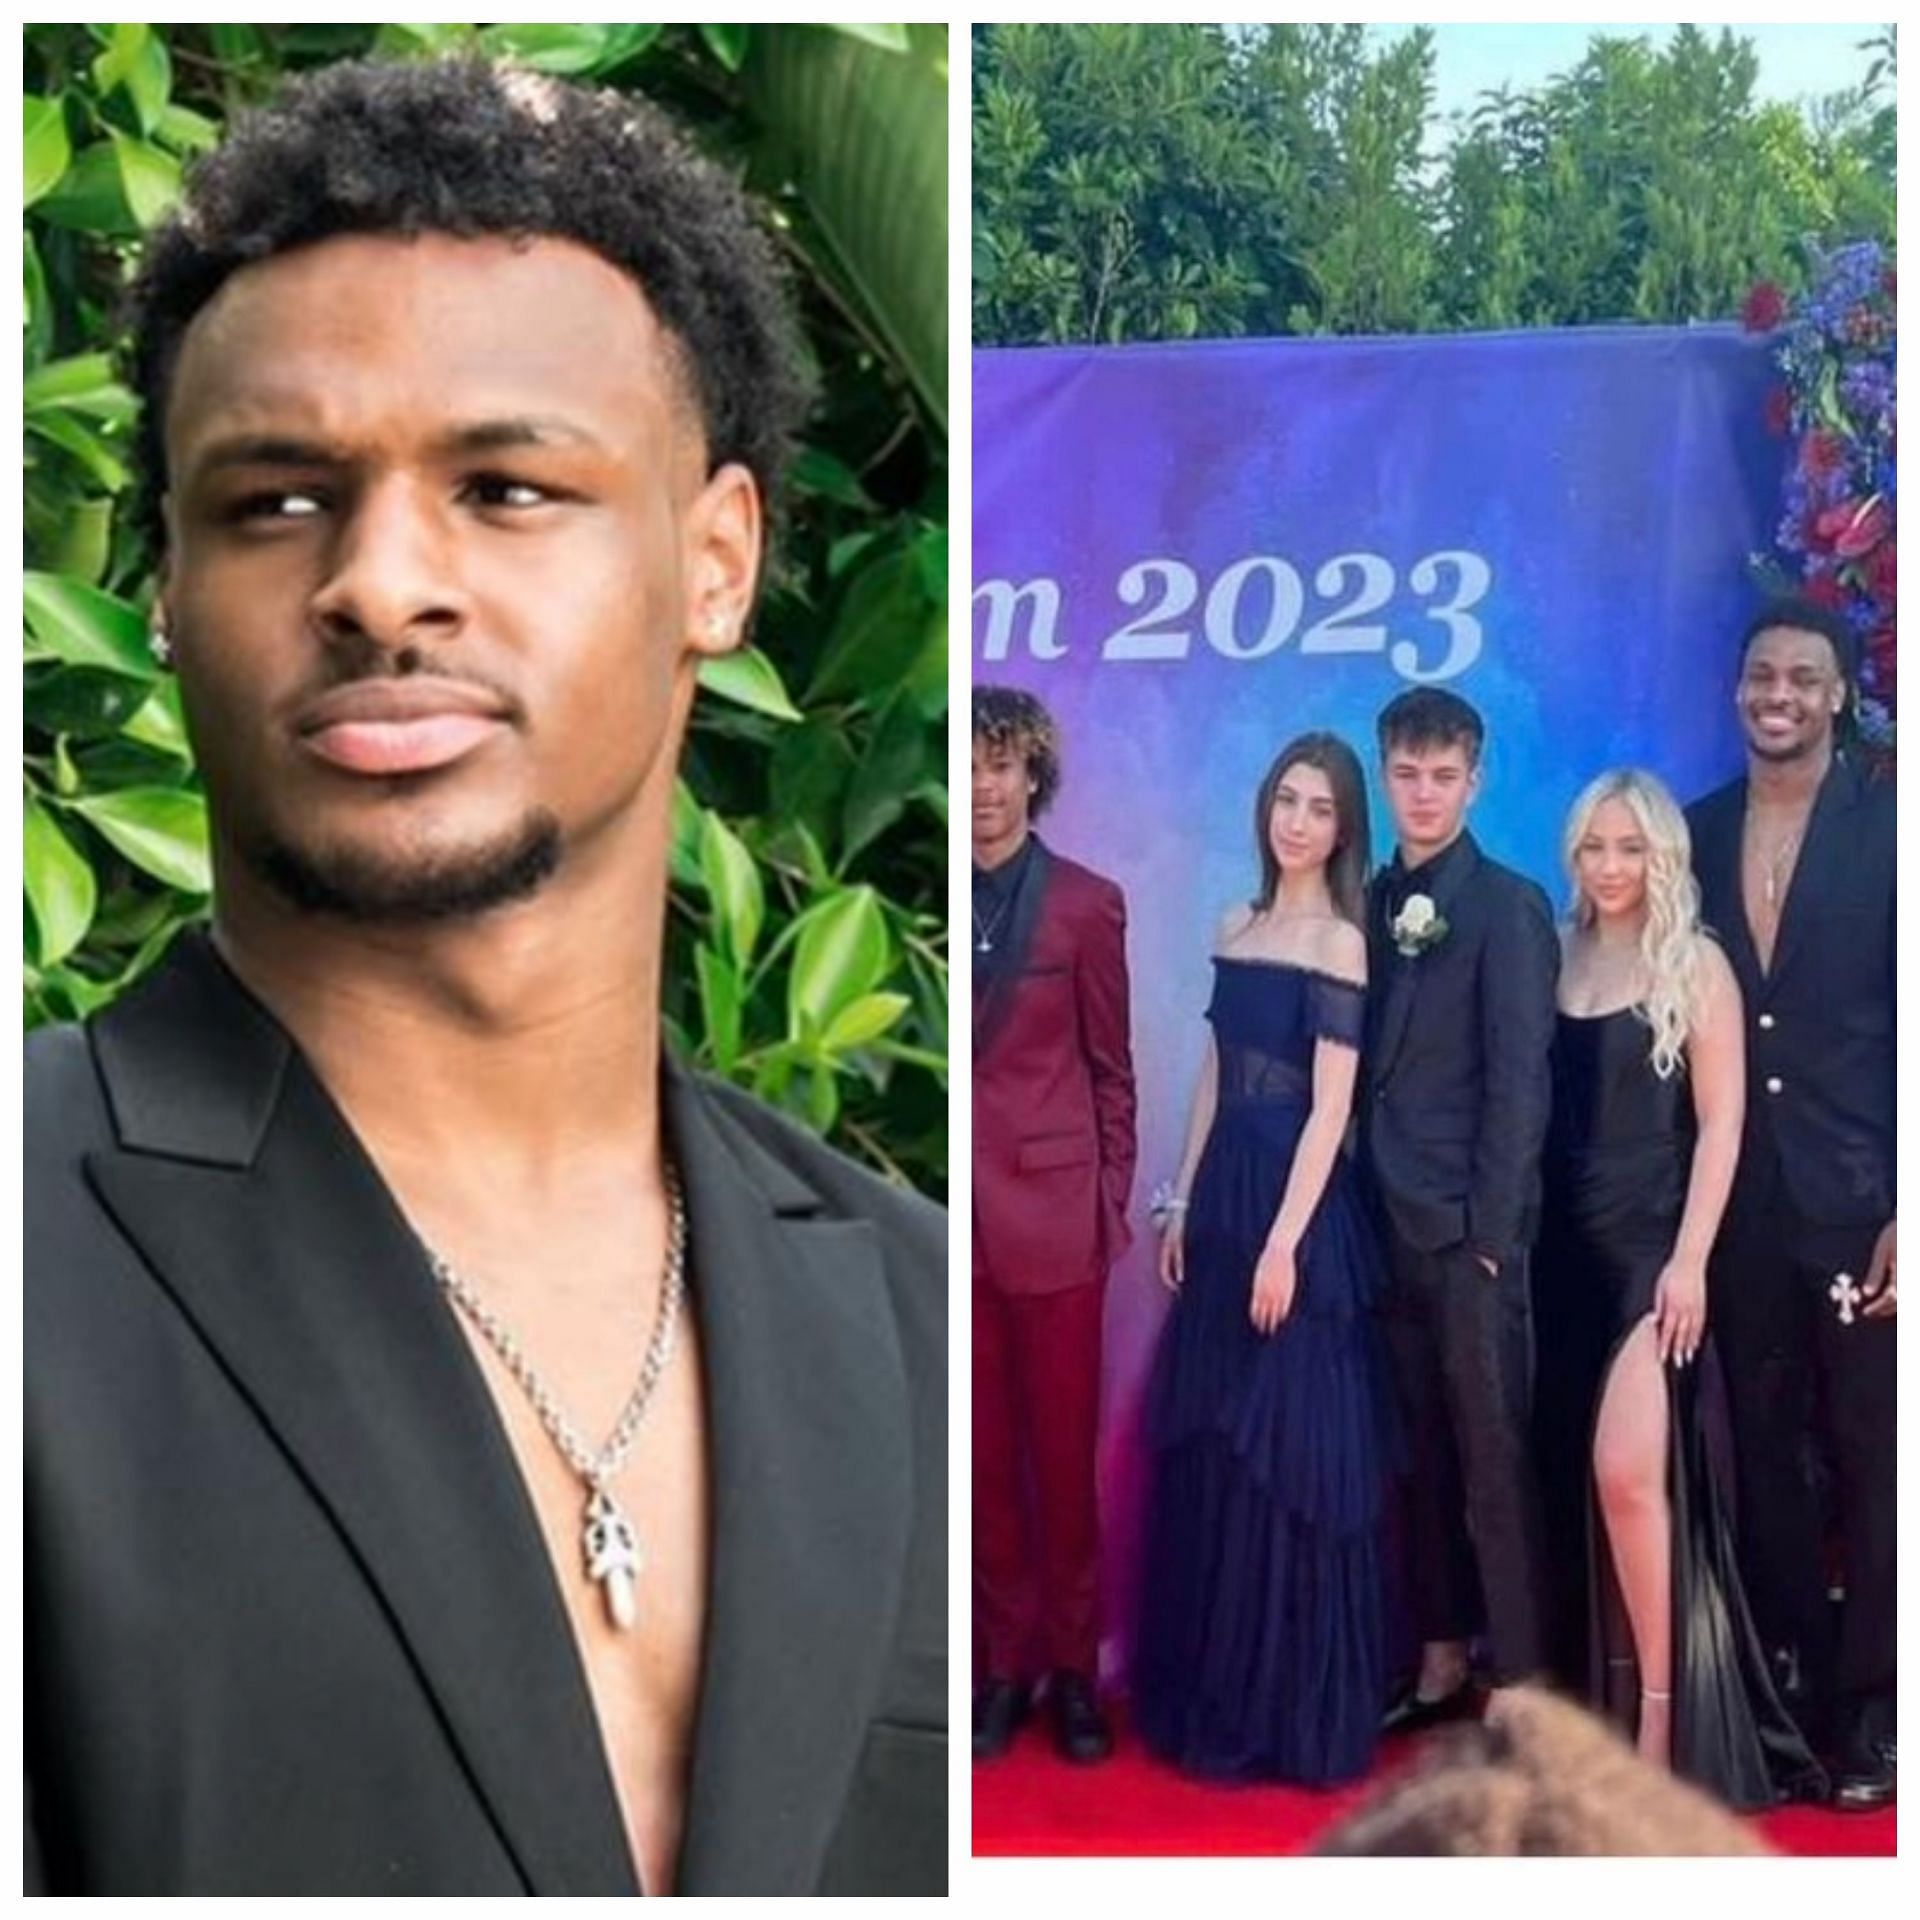 Photos Bronny James poses with his girlfriend for Prom 2023